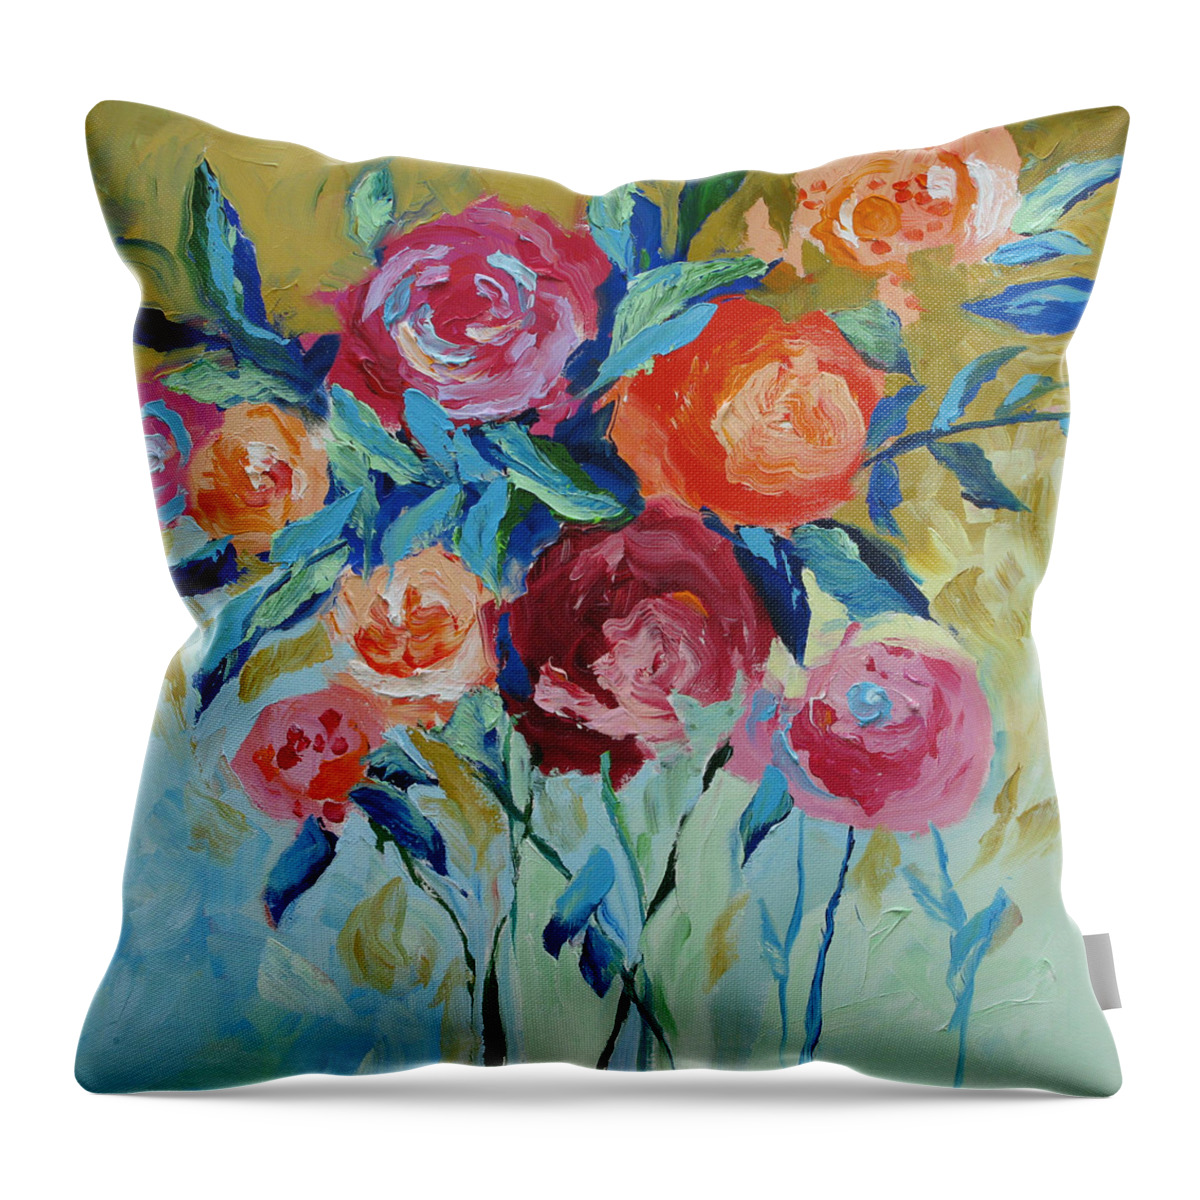 Art Throw Pillow featuring the painting Nature's Wonder by Linda Monfort